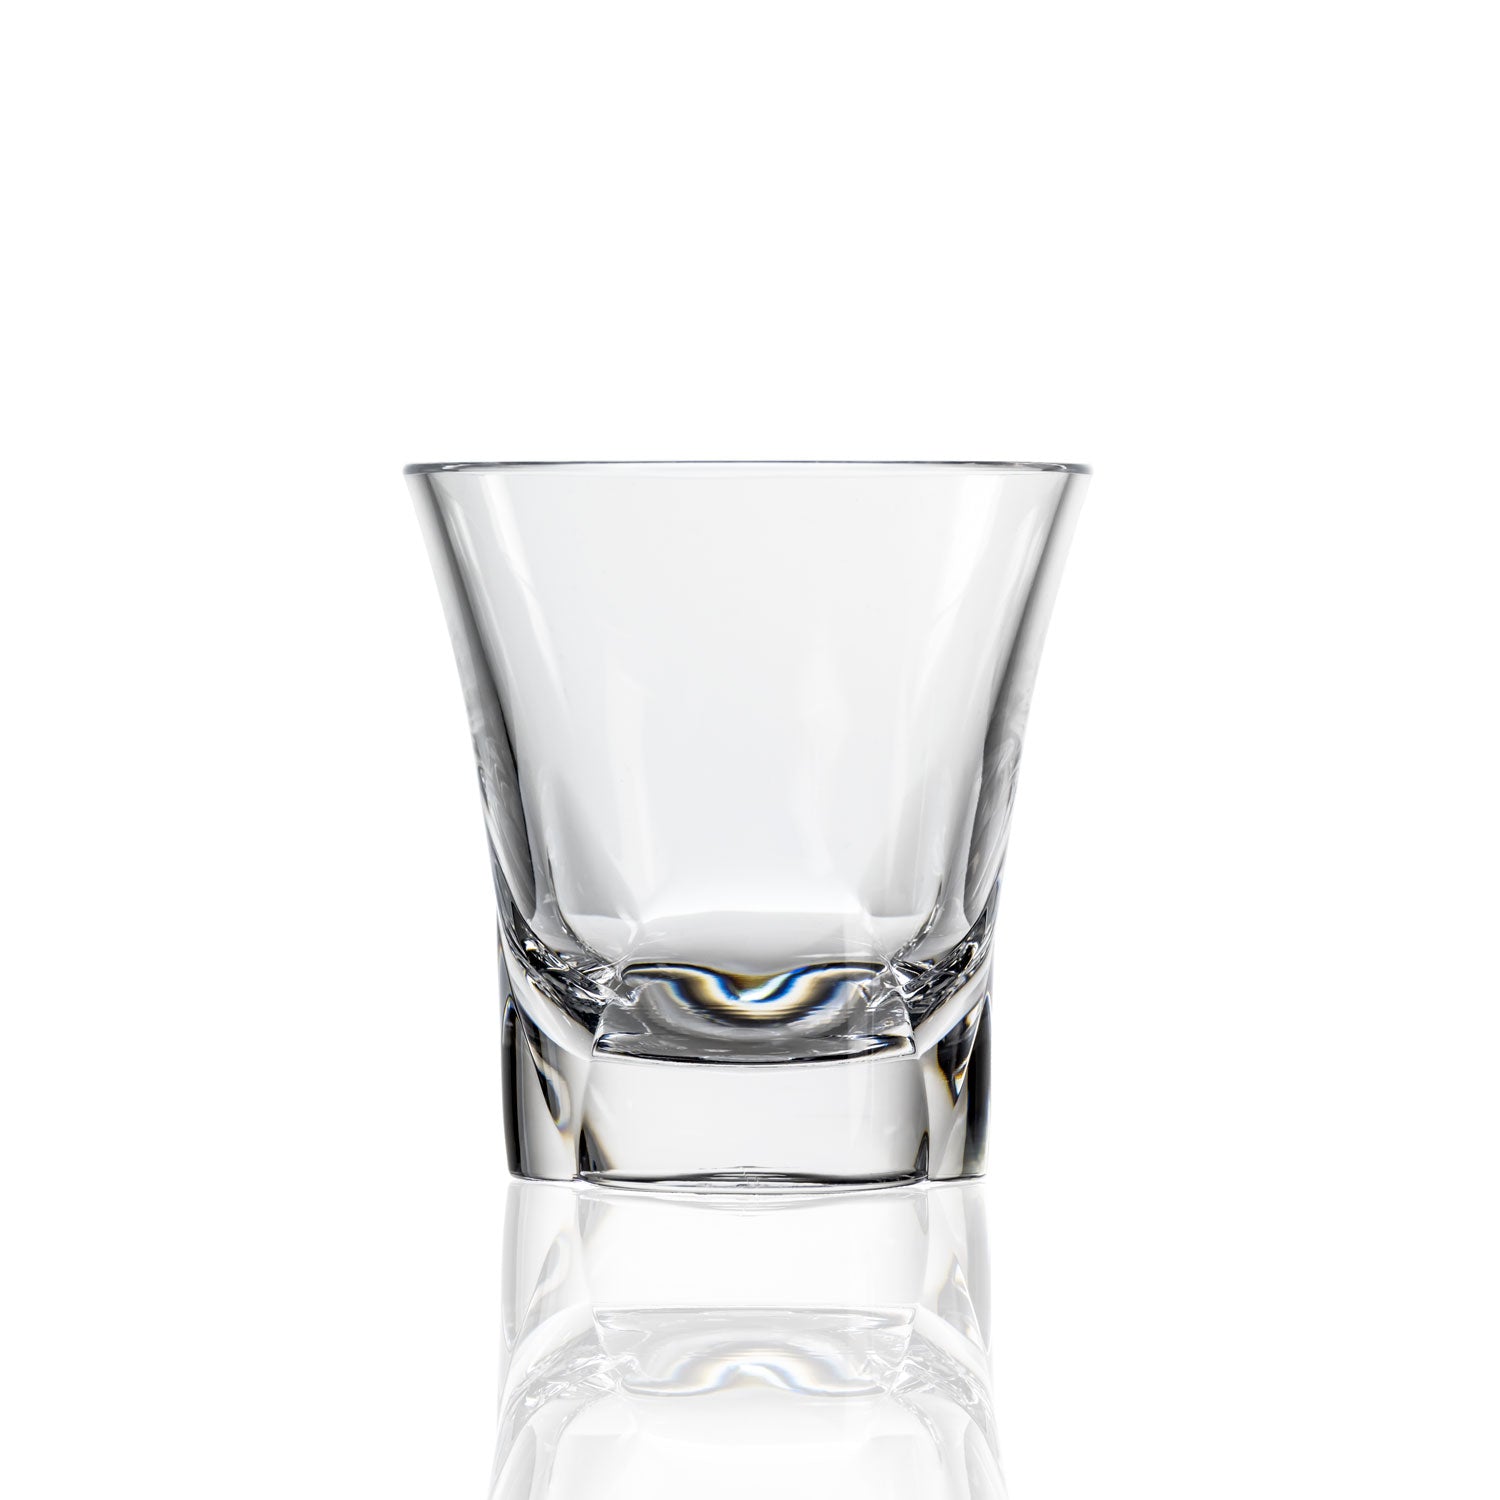 10-ounce clear acrylic tumbler in the Fiori collection by Merritt Designs. Front view on white background